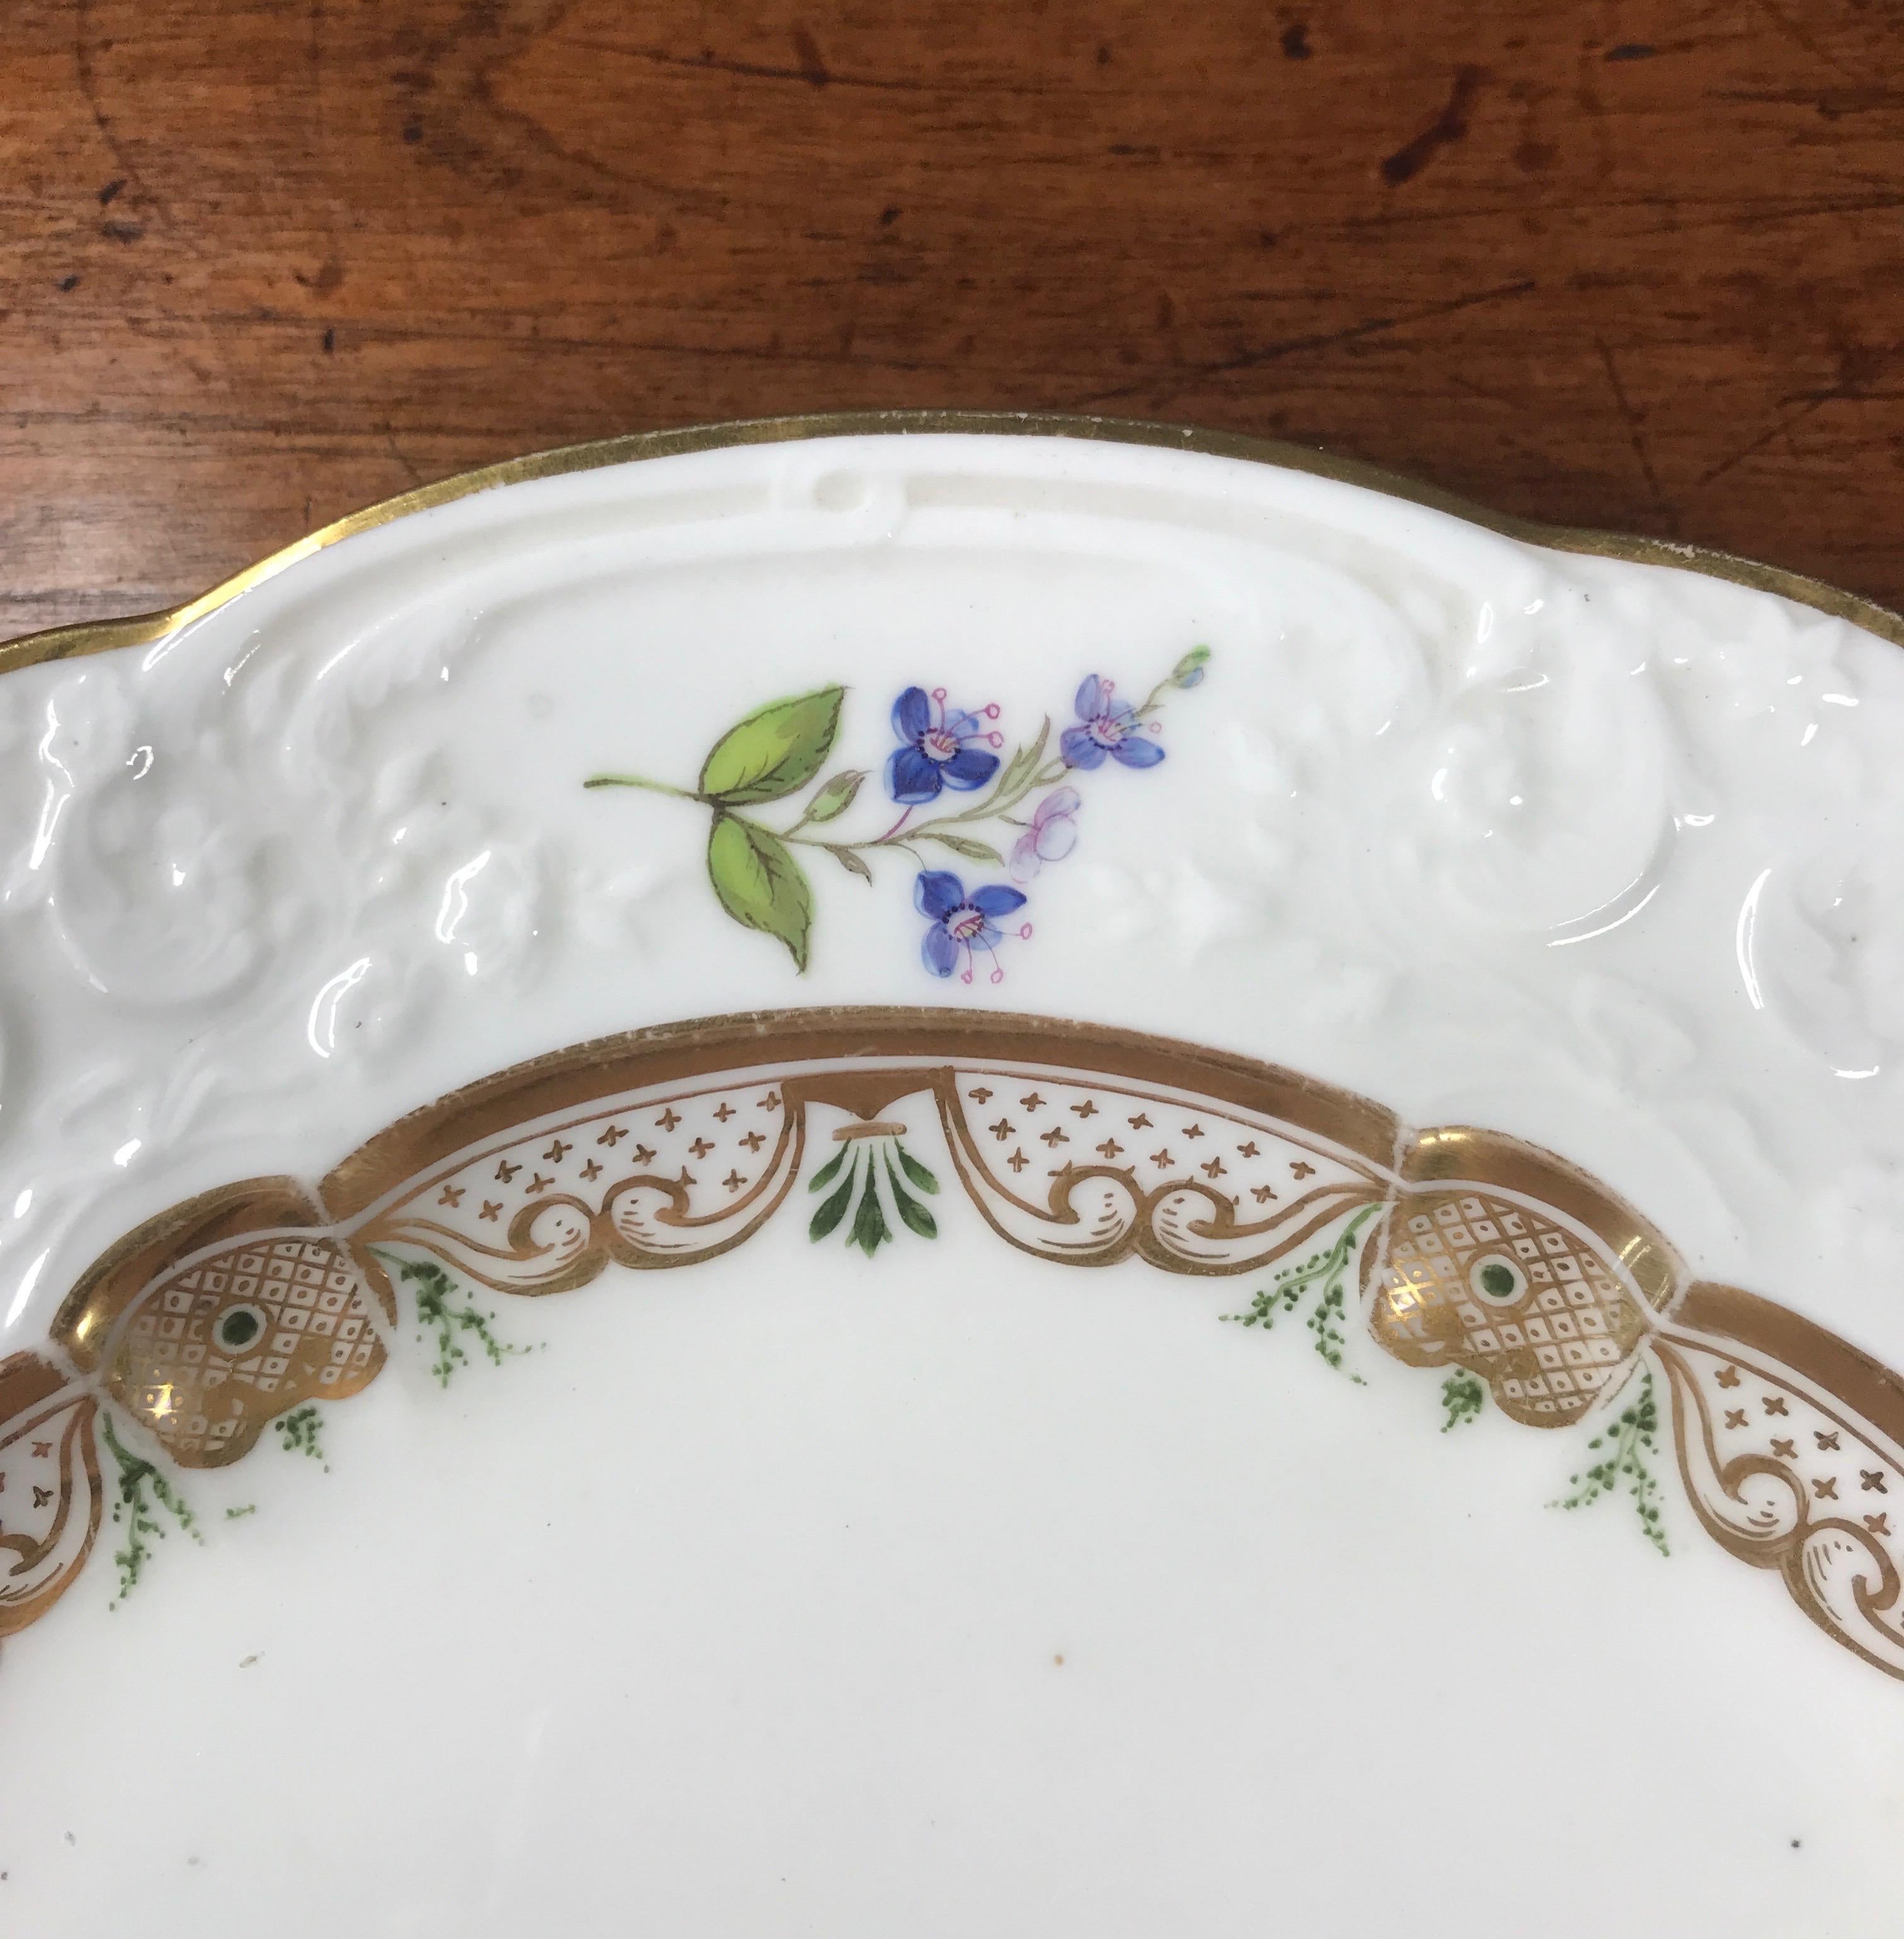 Swansea Porcelain Plate with Flower Specimens, C. 1820 In Good Condition For Sale In Geelong, Victoria